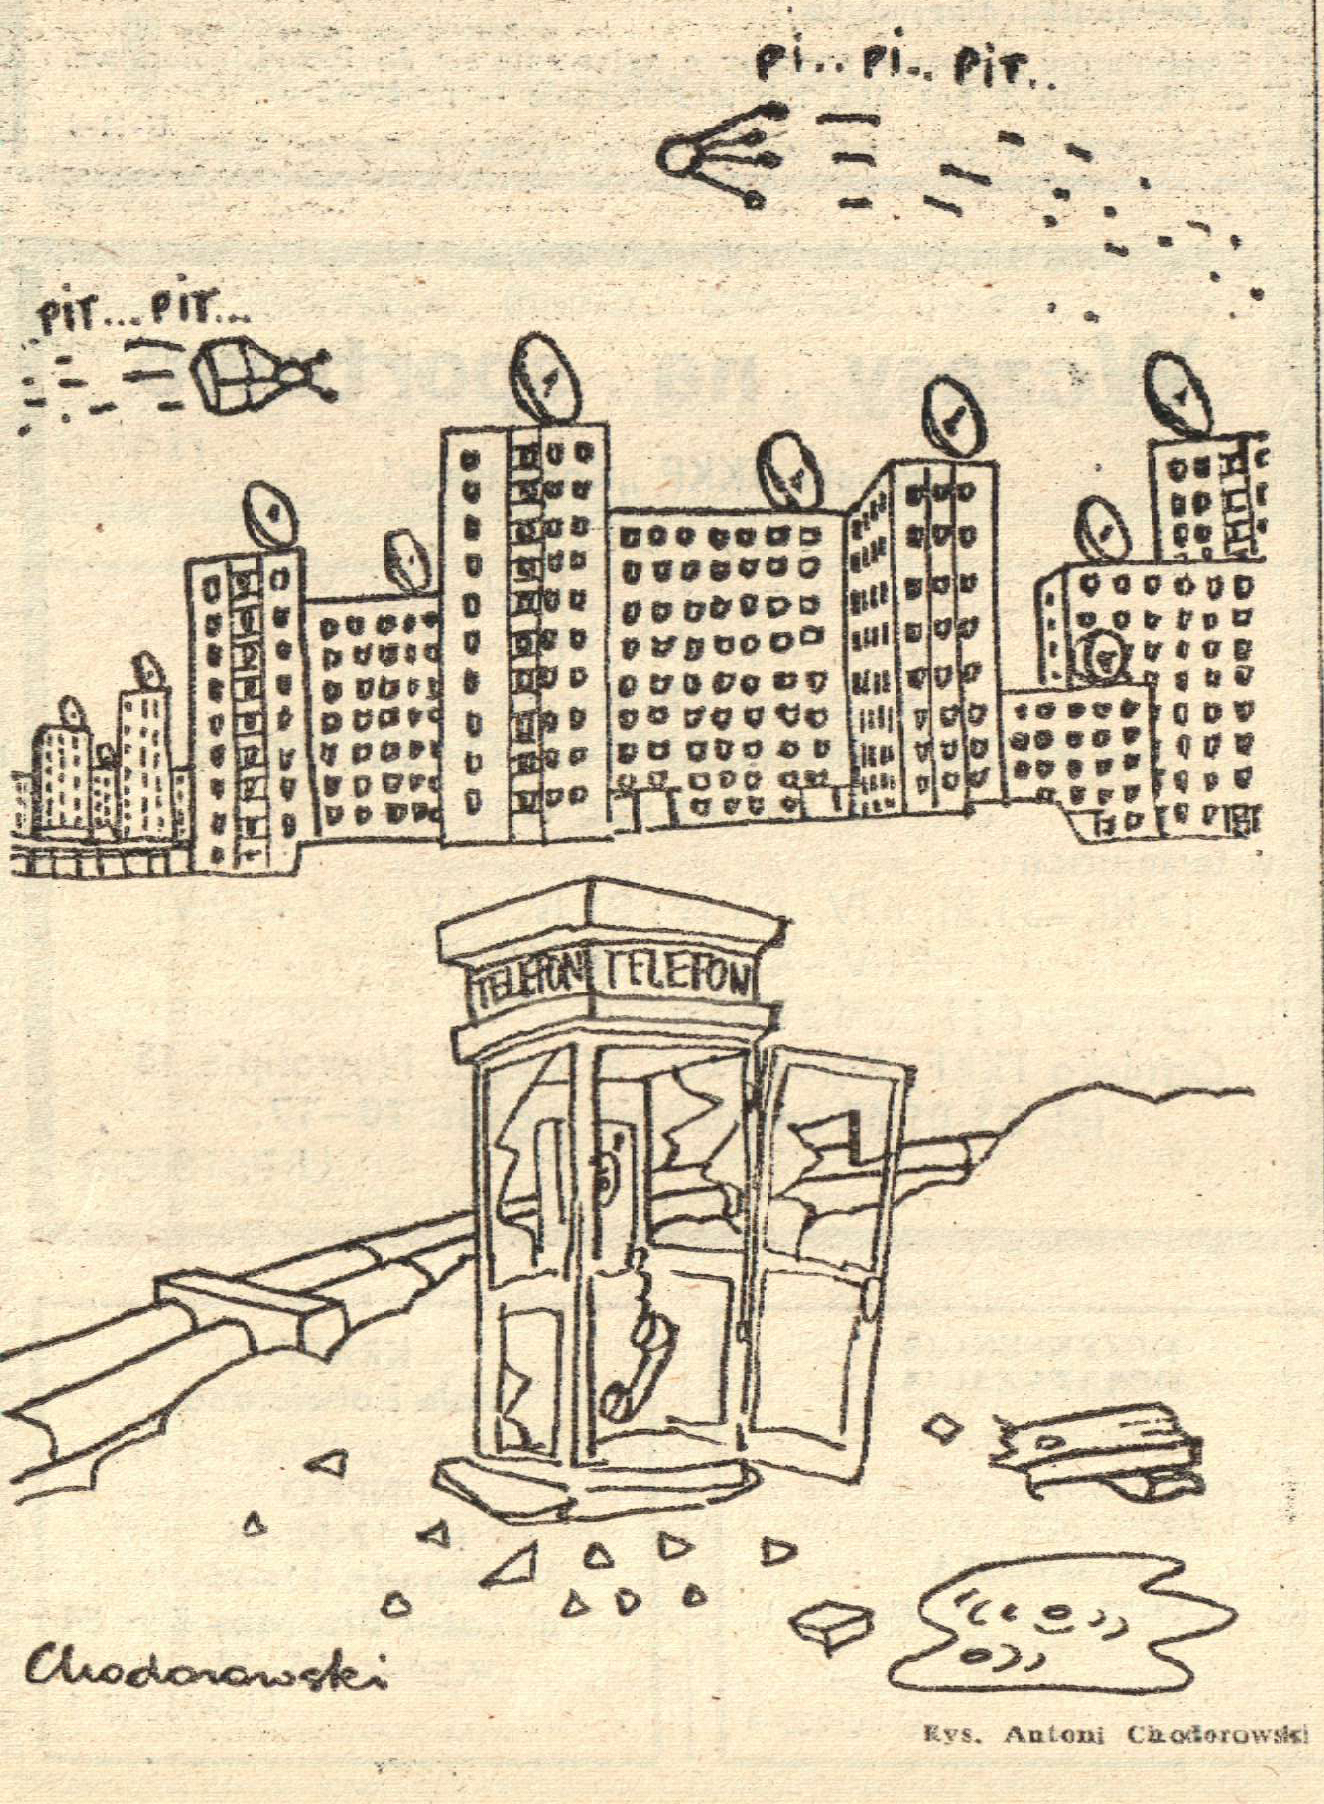 A satirical drawing depicting how satellite television was installed in the Warsaw Ursynów estate before phone lines. Image: Pasmo magazine (1988)